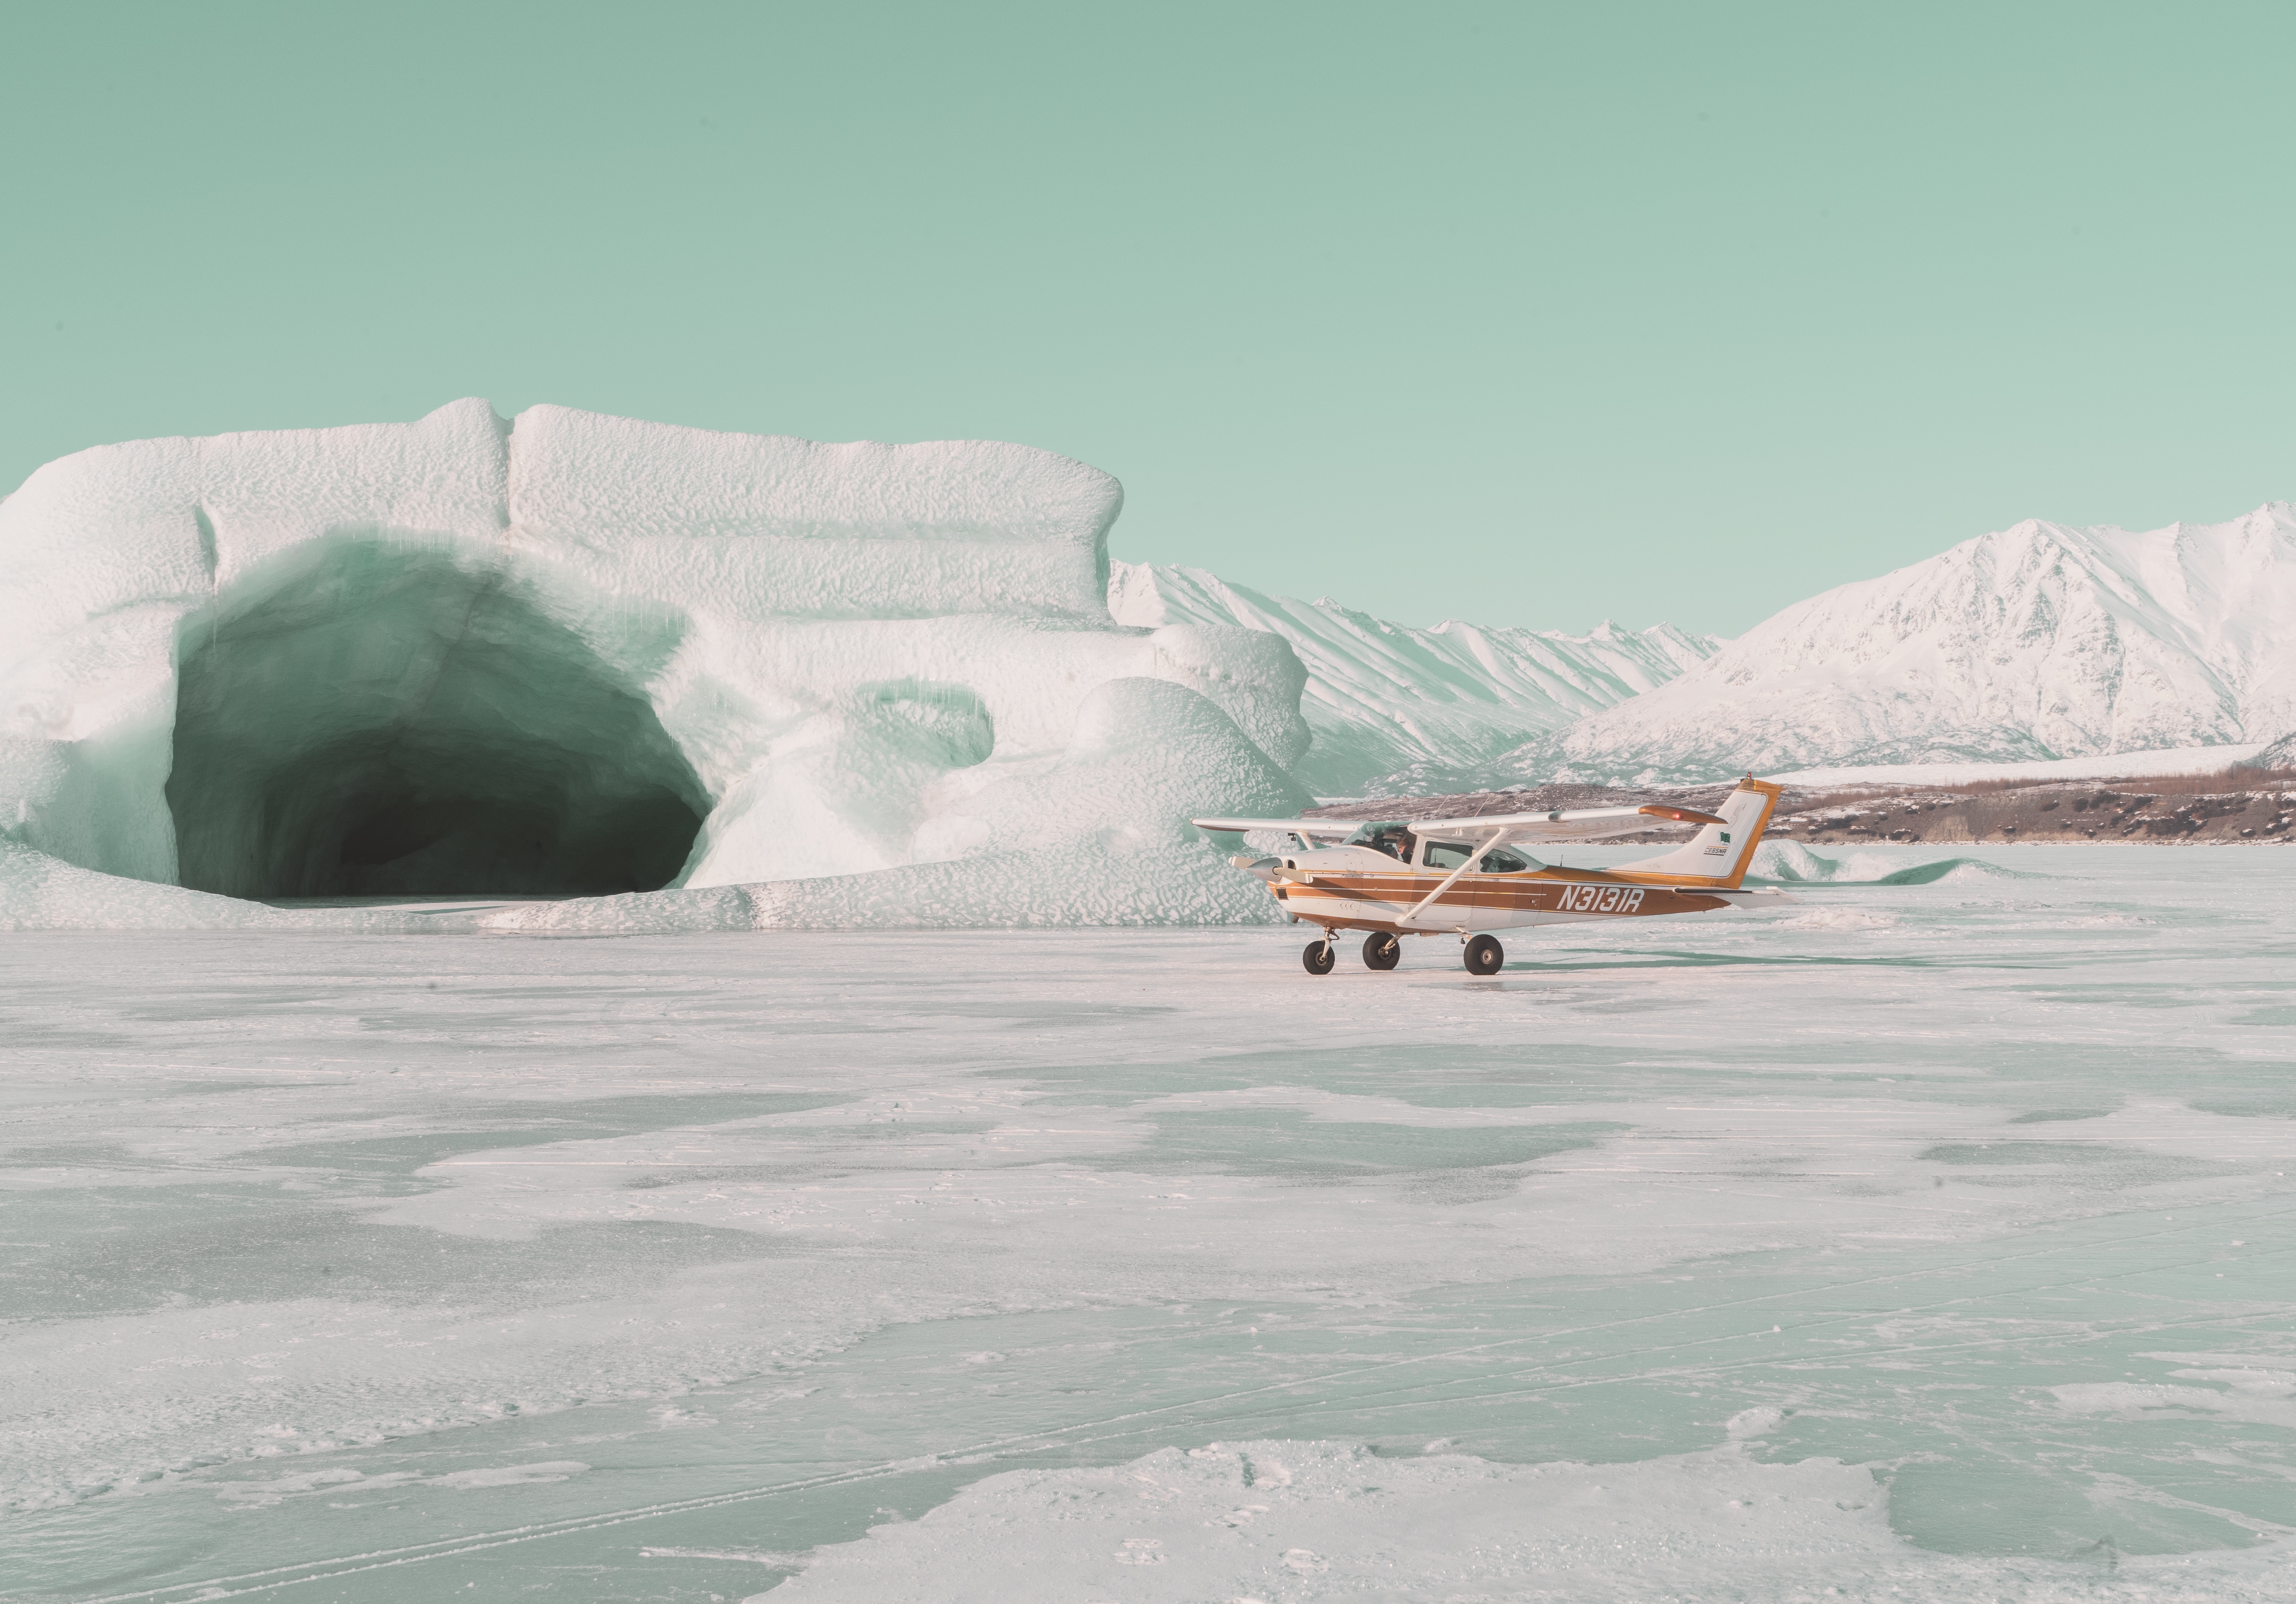 Airplane parked on ice